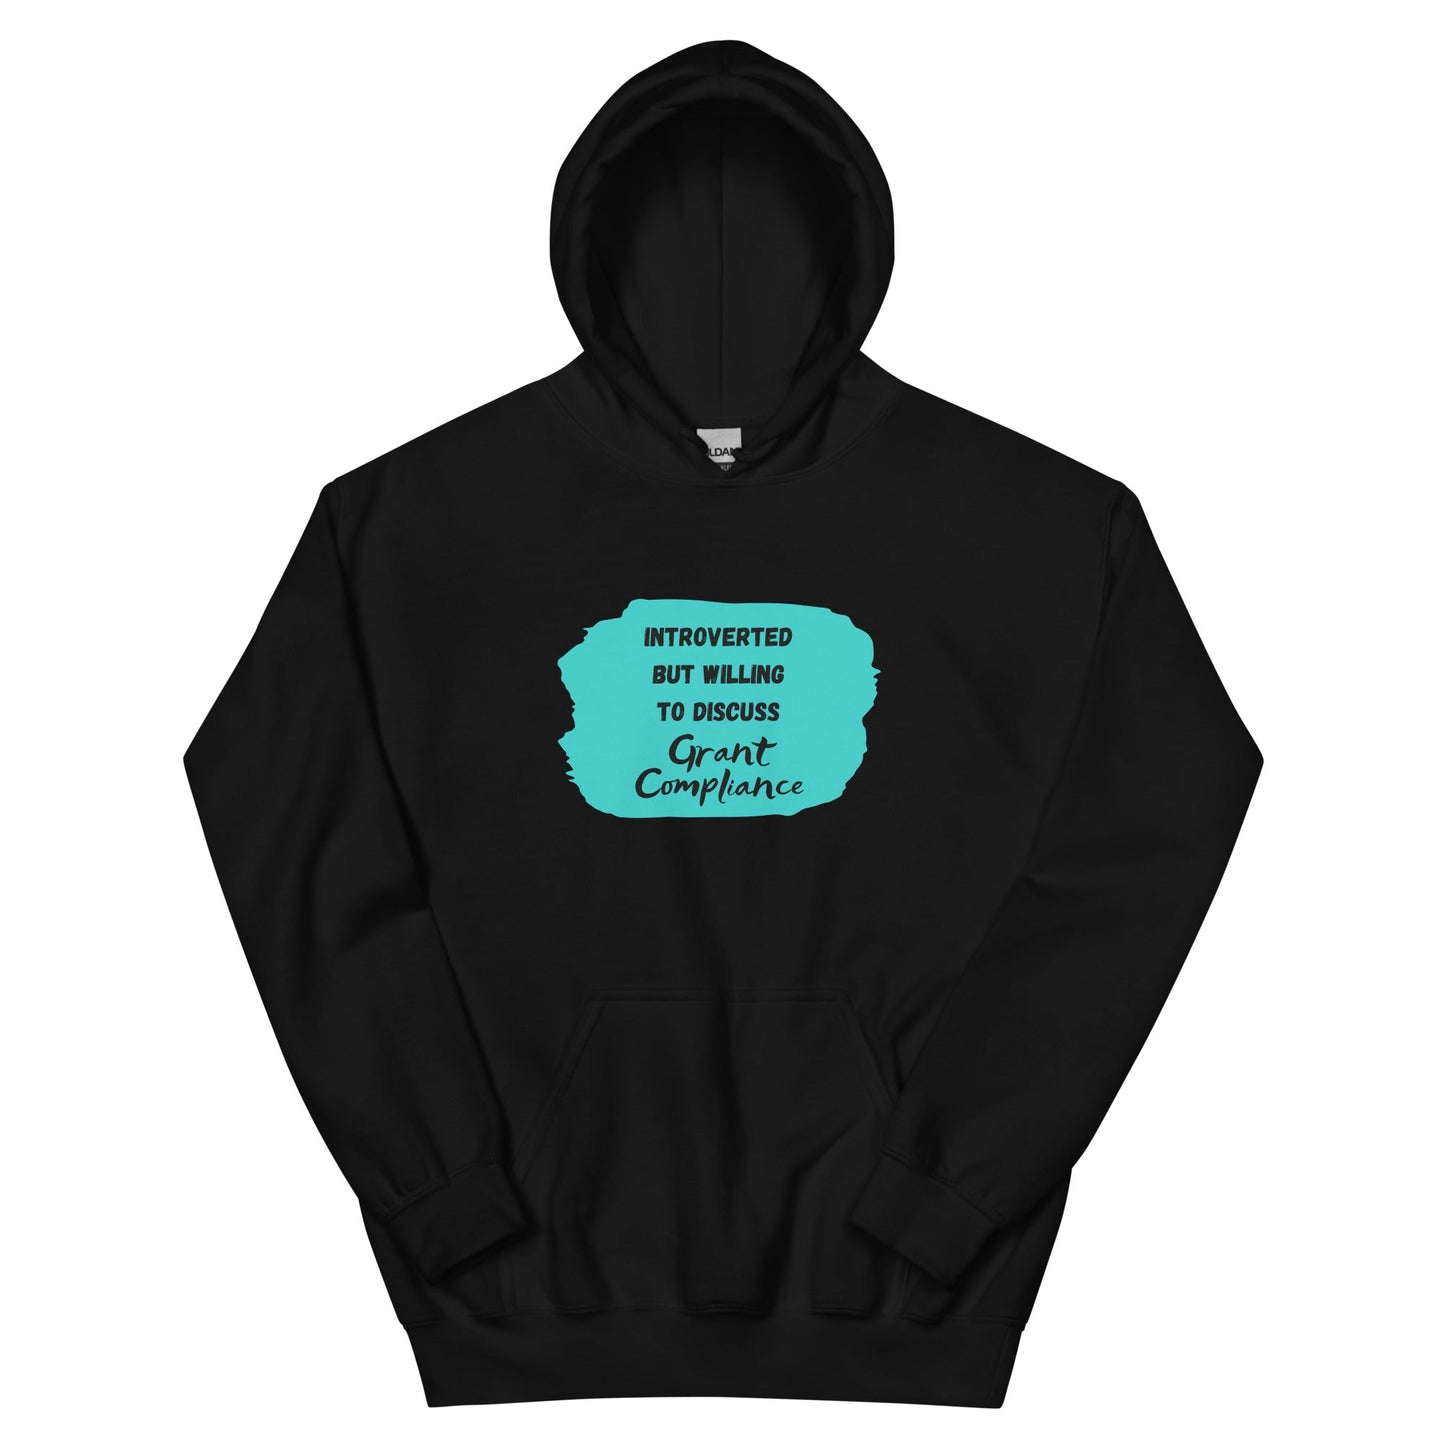 Introverted but Willing to Discuss Grant Compliance Unisex Hoodie